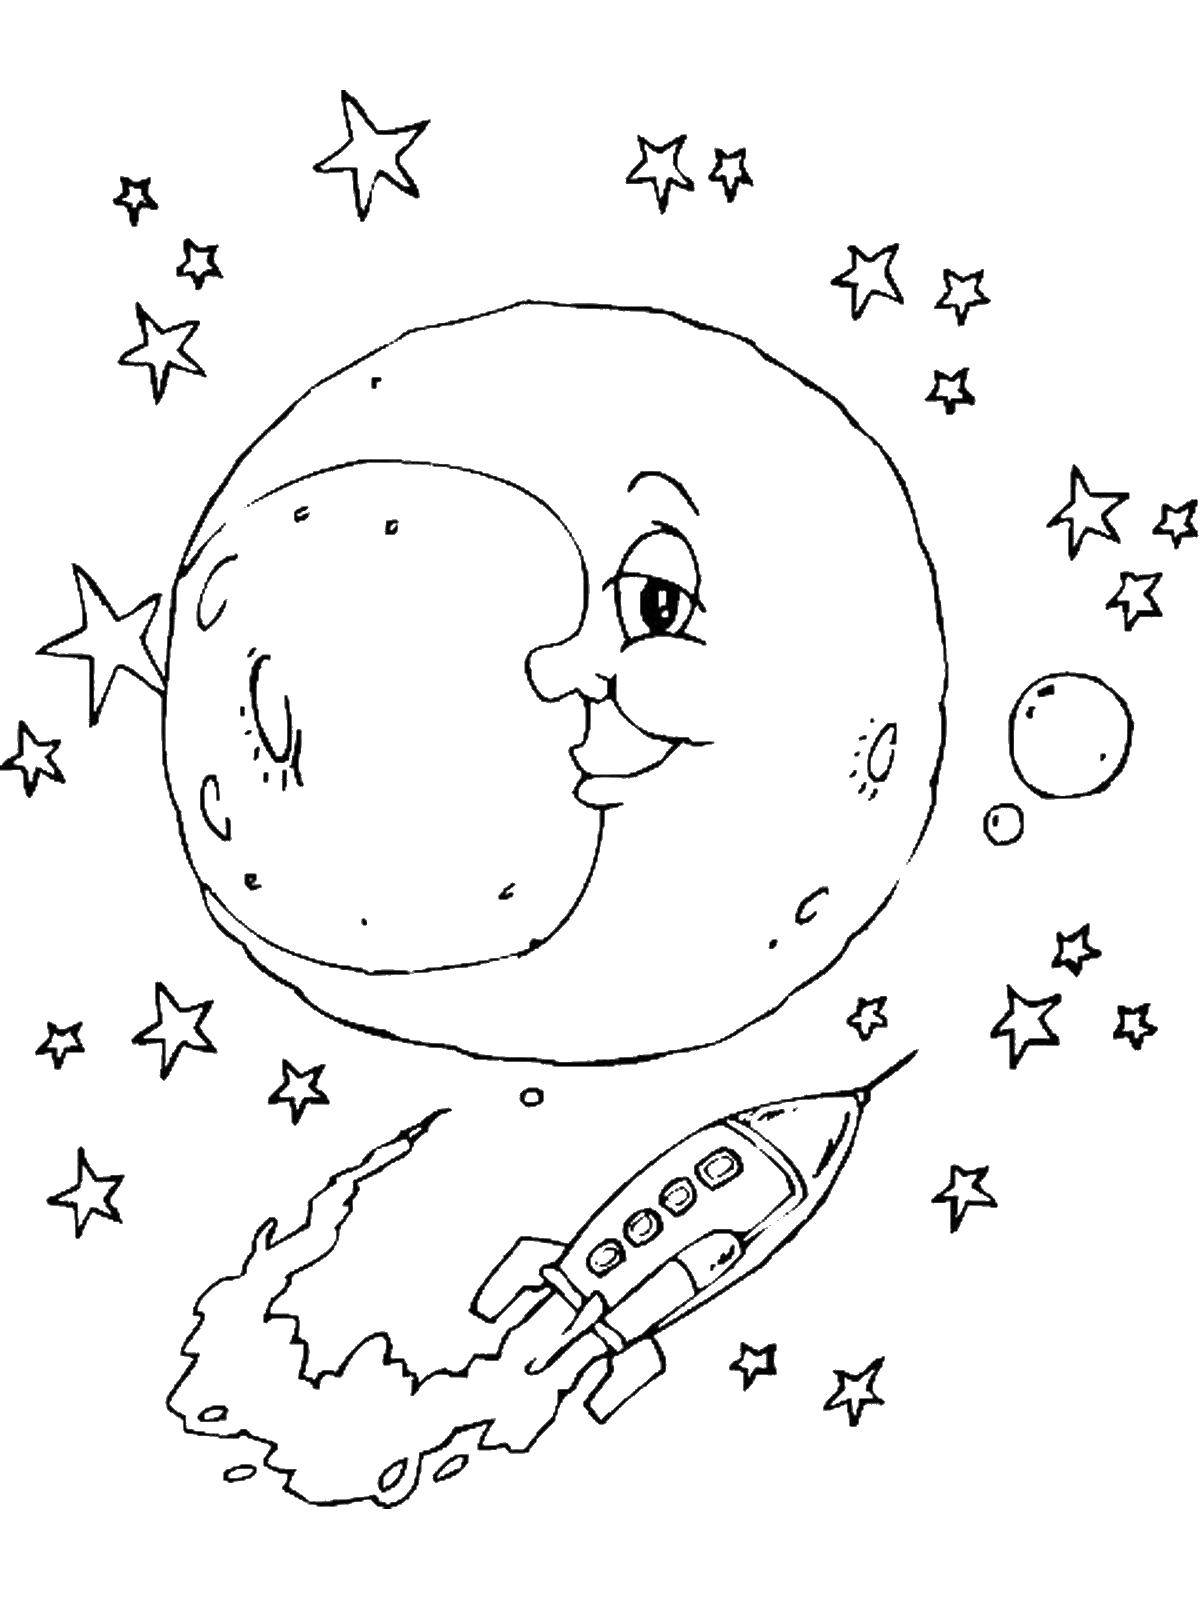 Coloring Flight of a rocket to the moon. Category moon. Tags:  moon.